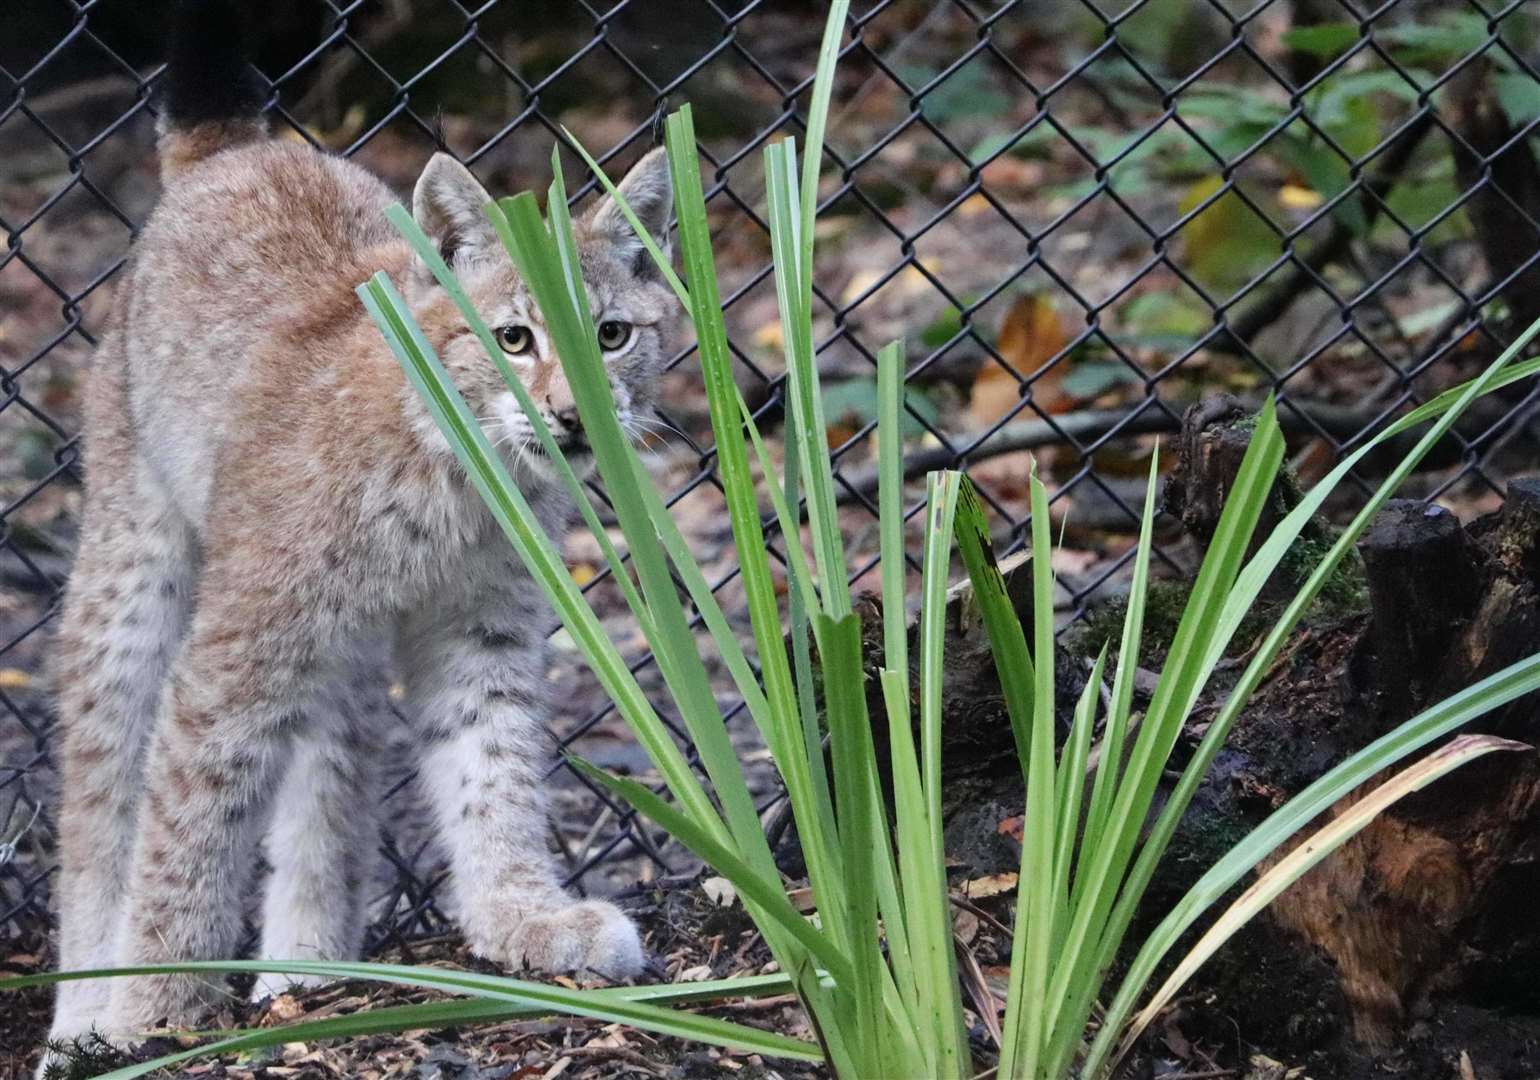 One of the lynxes that can be seen at Wildwood